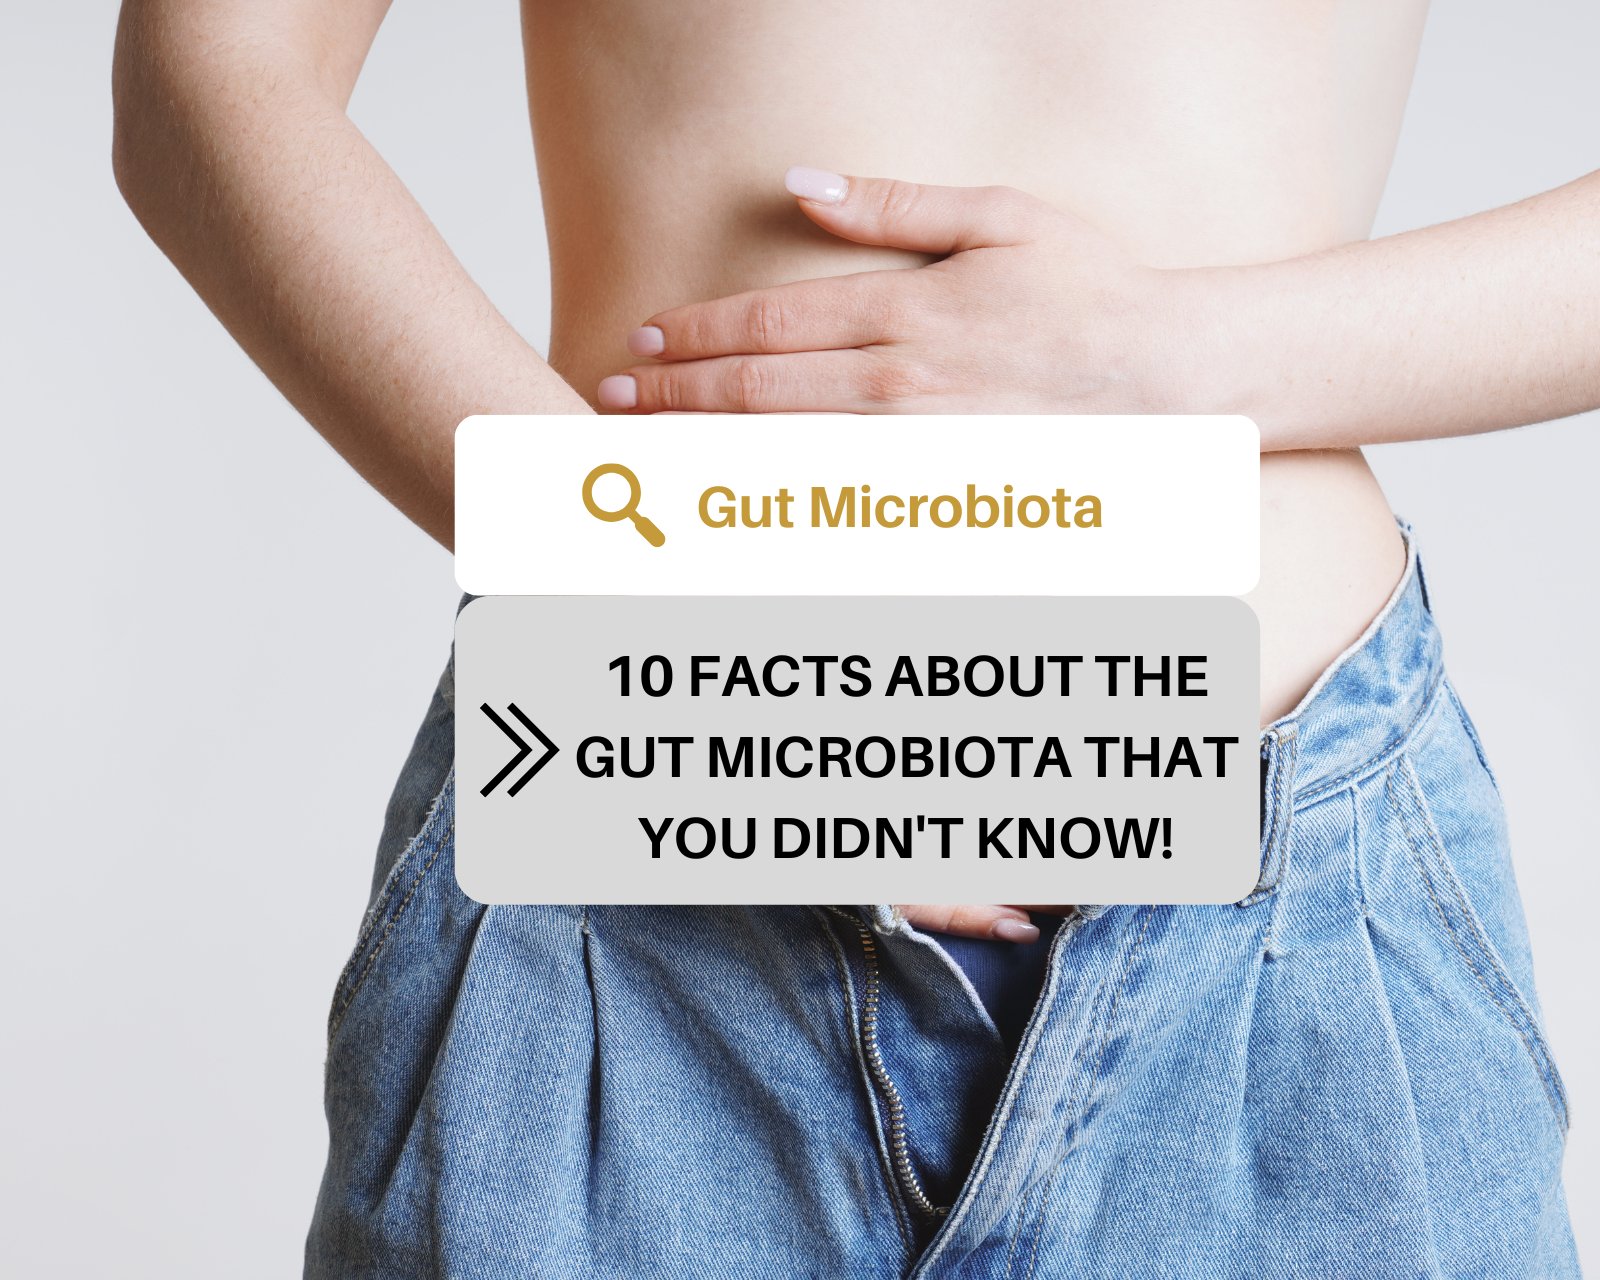 10 facts about the gut microbiota you didn't know!